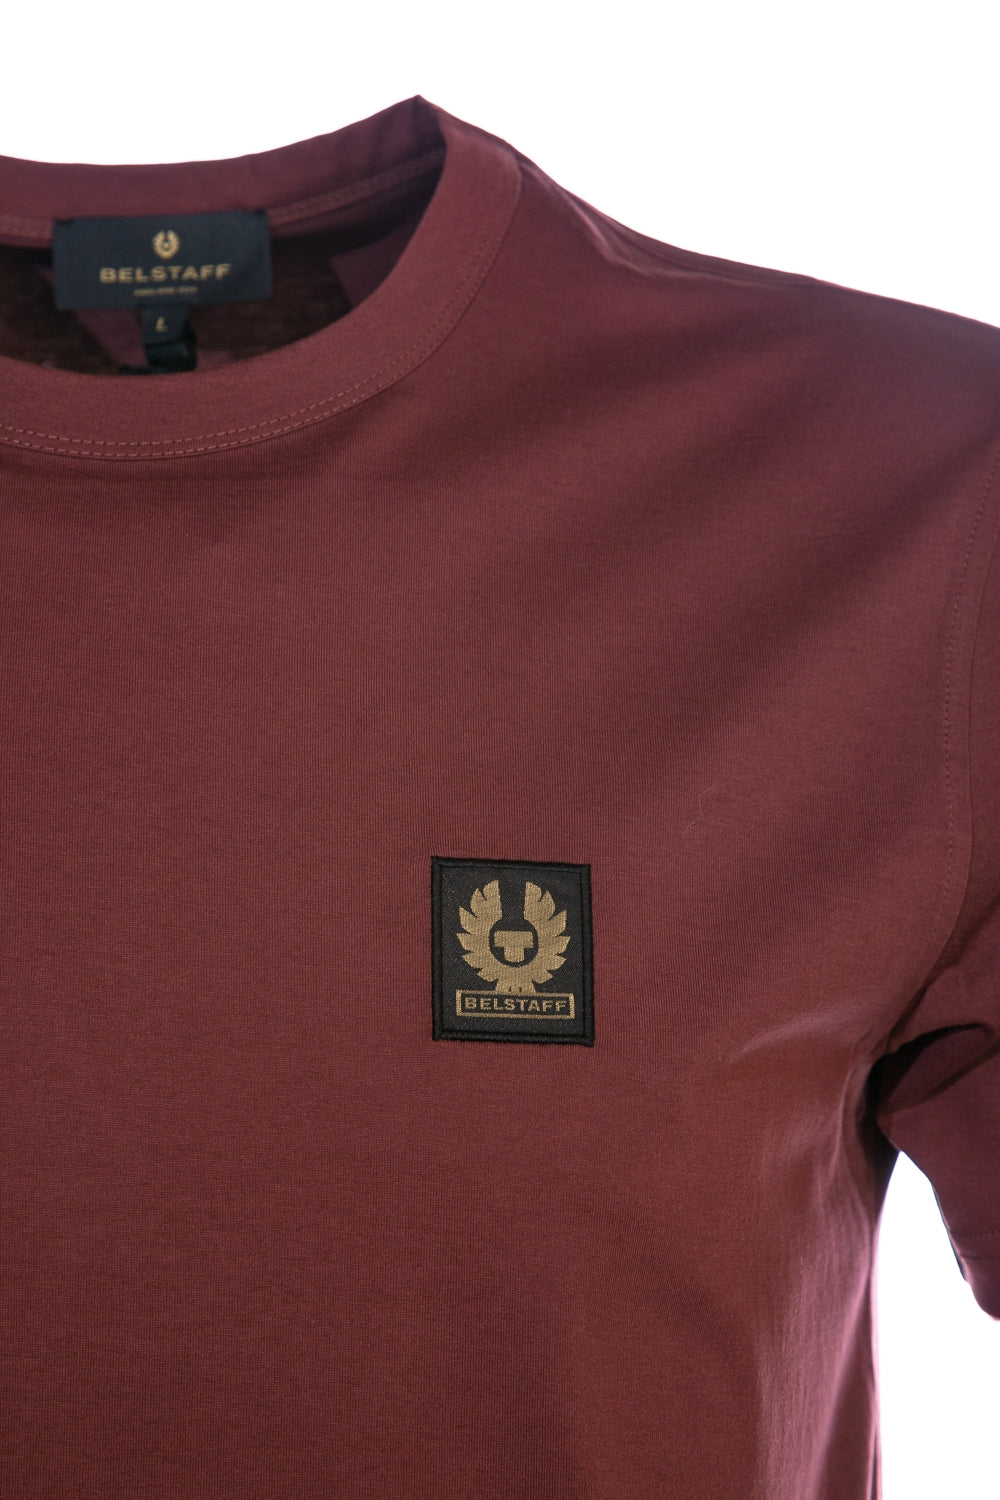 Belstaff Classic T-Shirt in Burnished Red